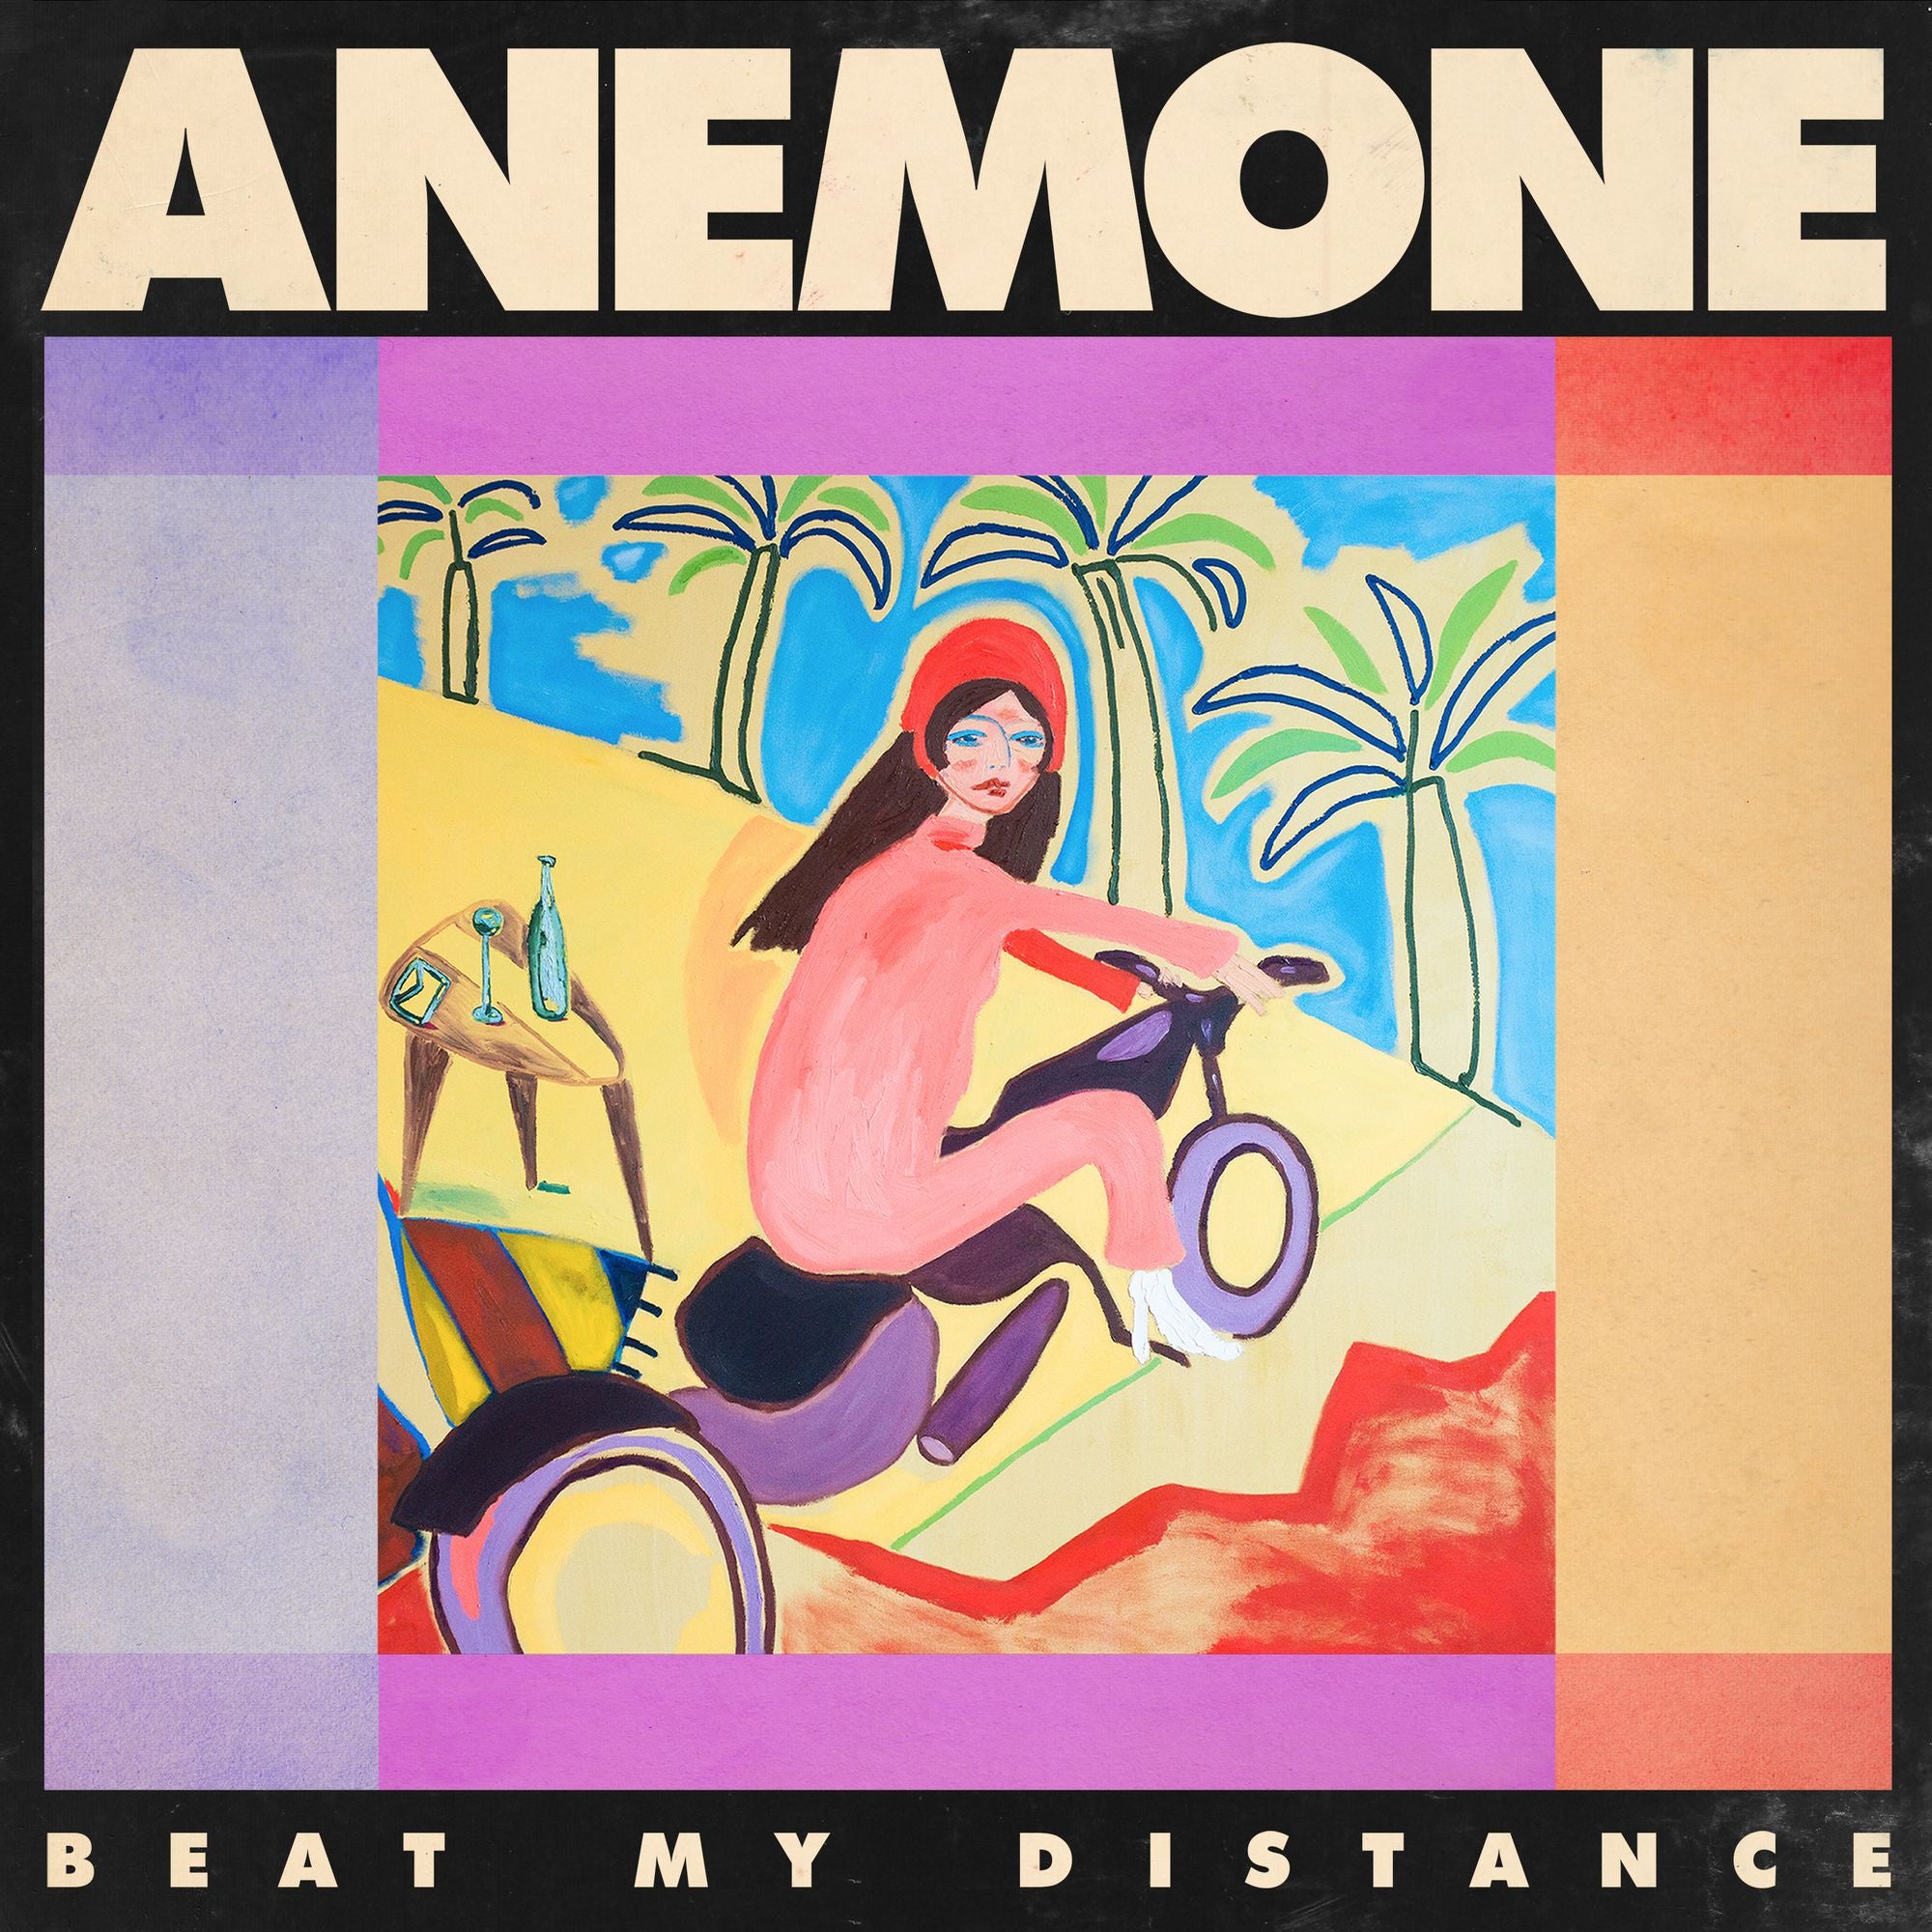 anemone ‎– Beat My Distance - New Lp Record 2019 Luminelle USA Vinyl - Indie Rock / Dream Pop / Psychedelic Rock